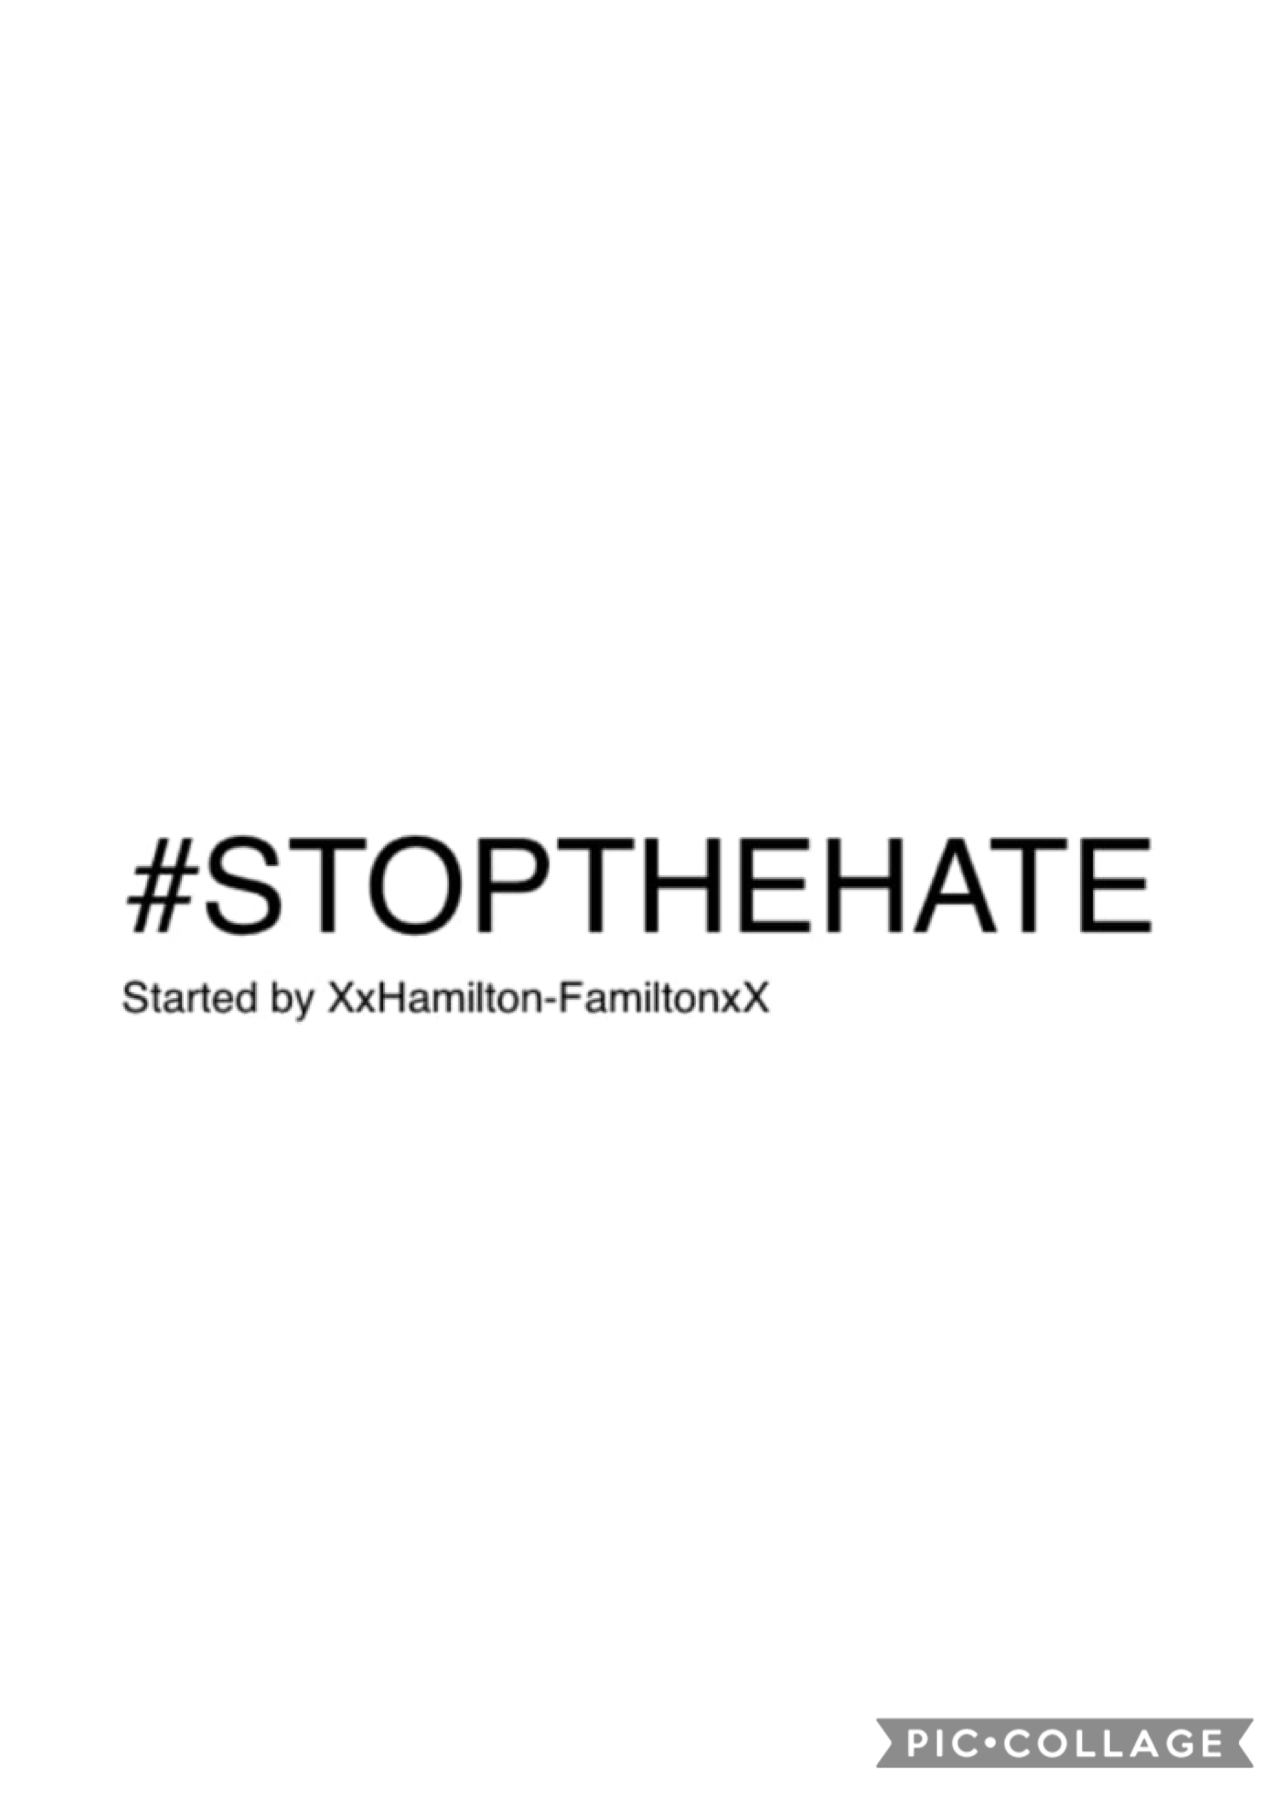 #stopthehate 
why not honestly